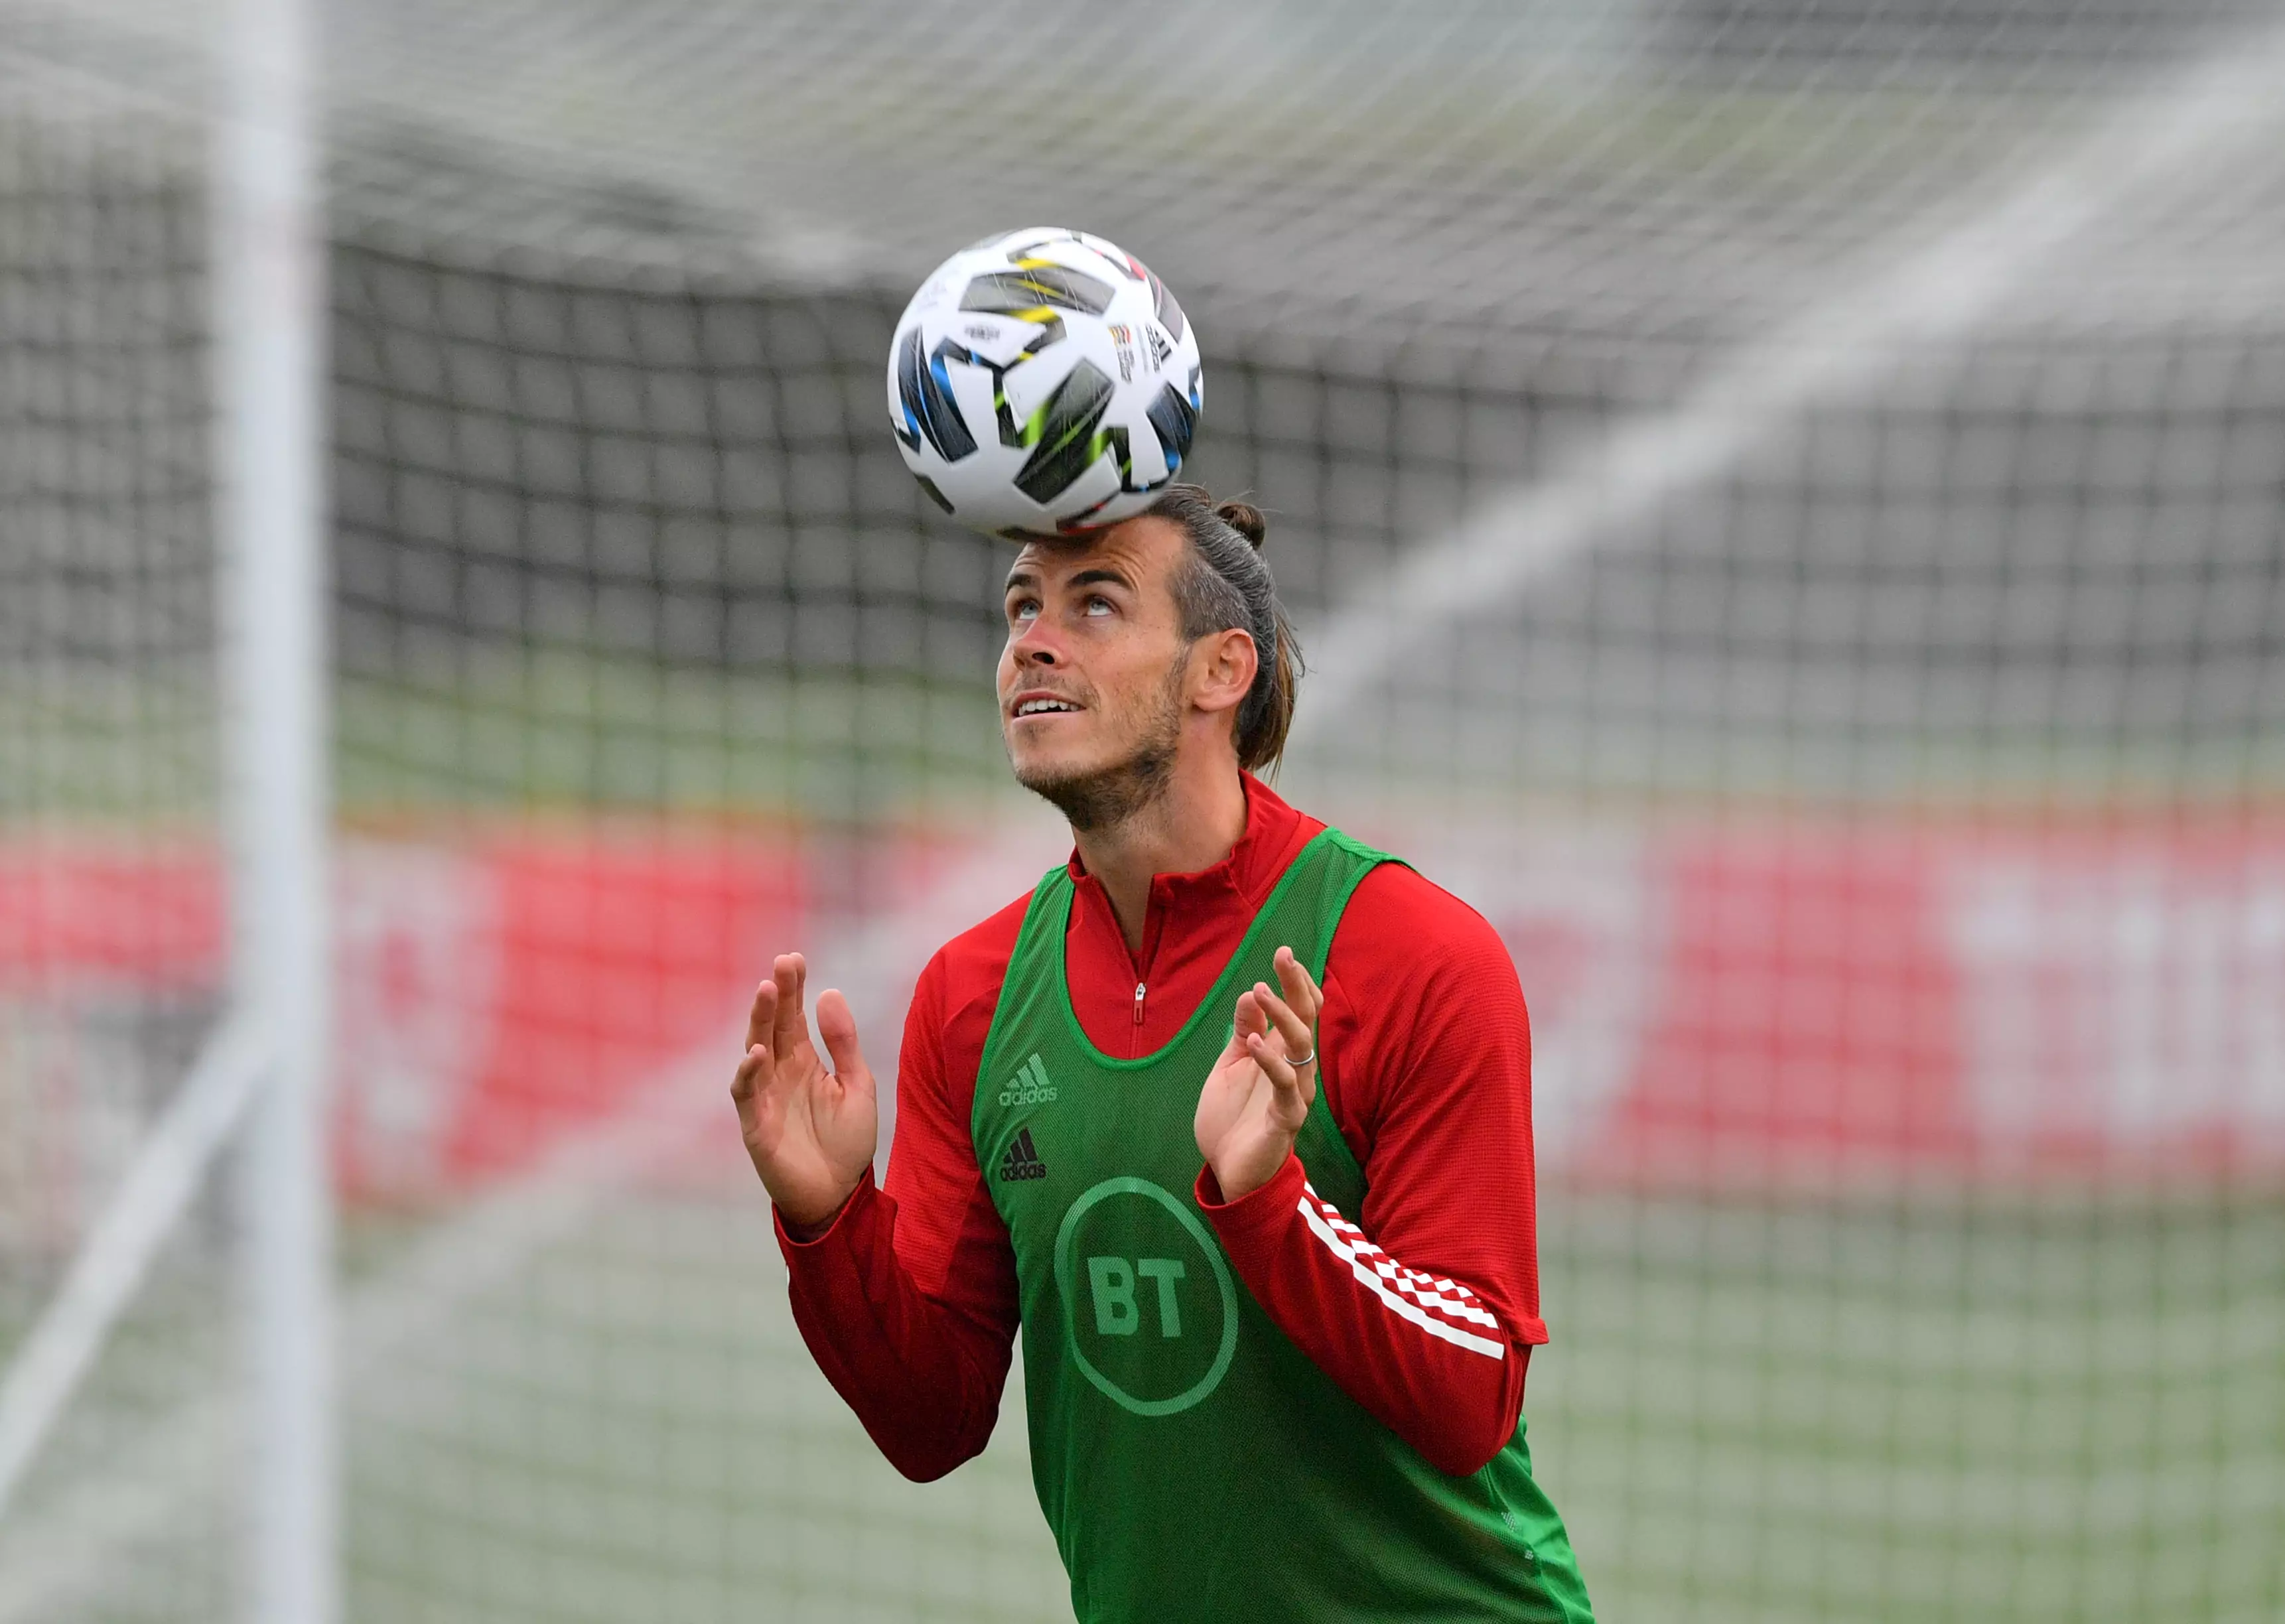 Gareth Bale remains Wales most valuable player. Image: PA Images